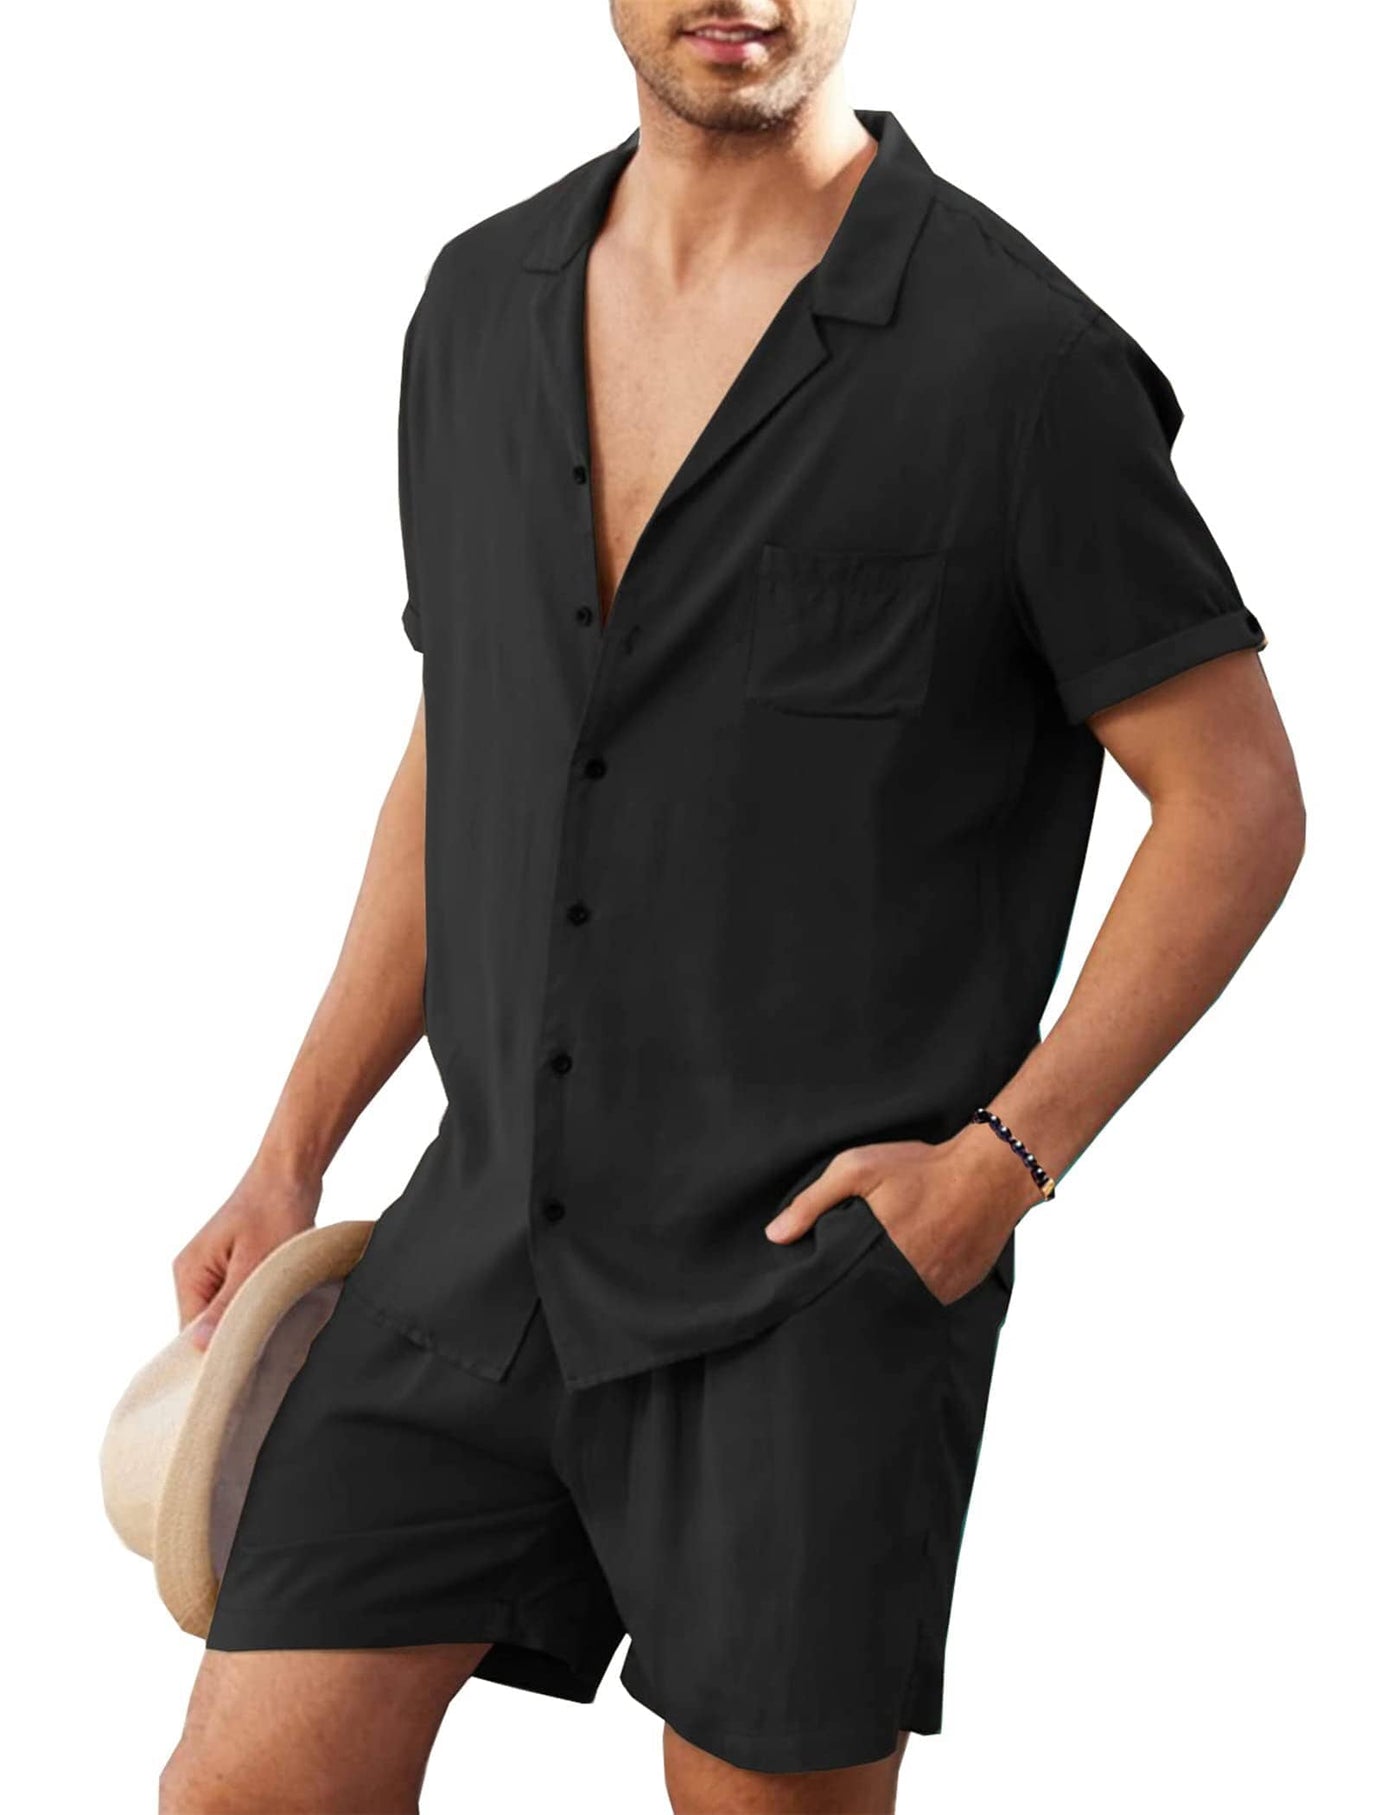 Beach Shirt Set (US Only) - Lightweight & Casual, Perfect for Outings ...